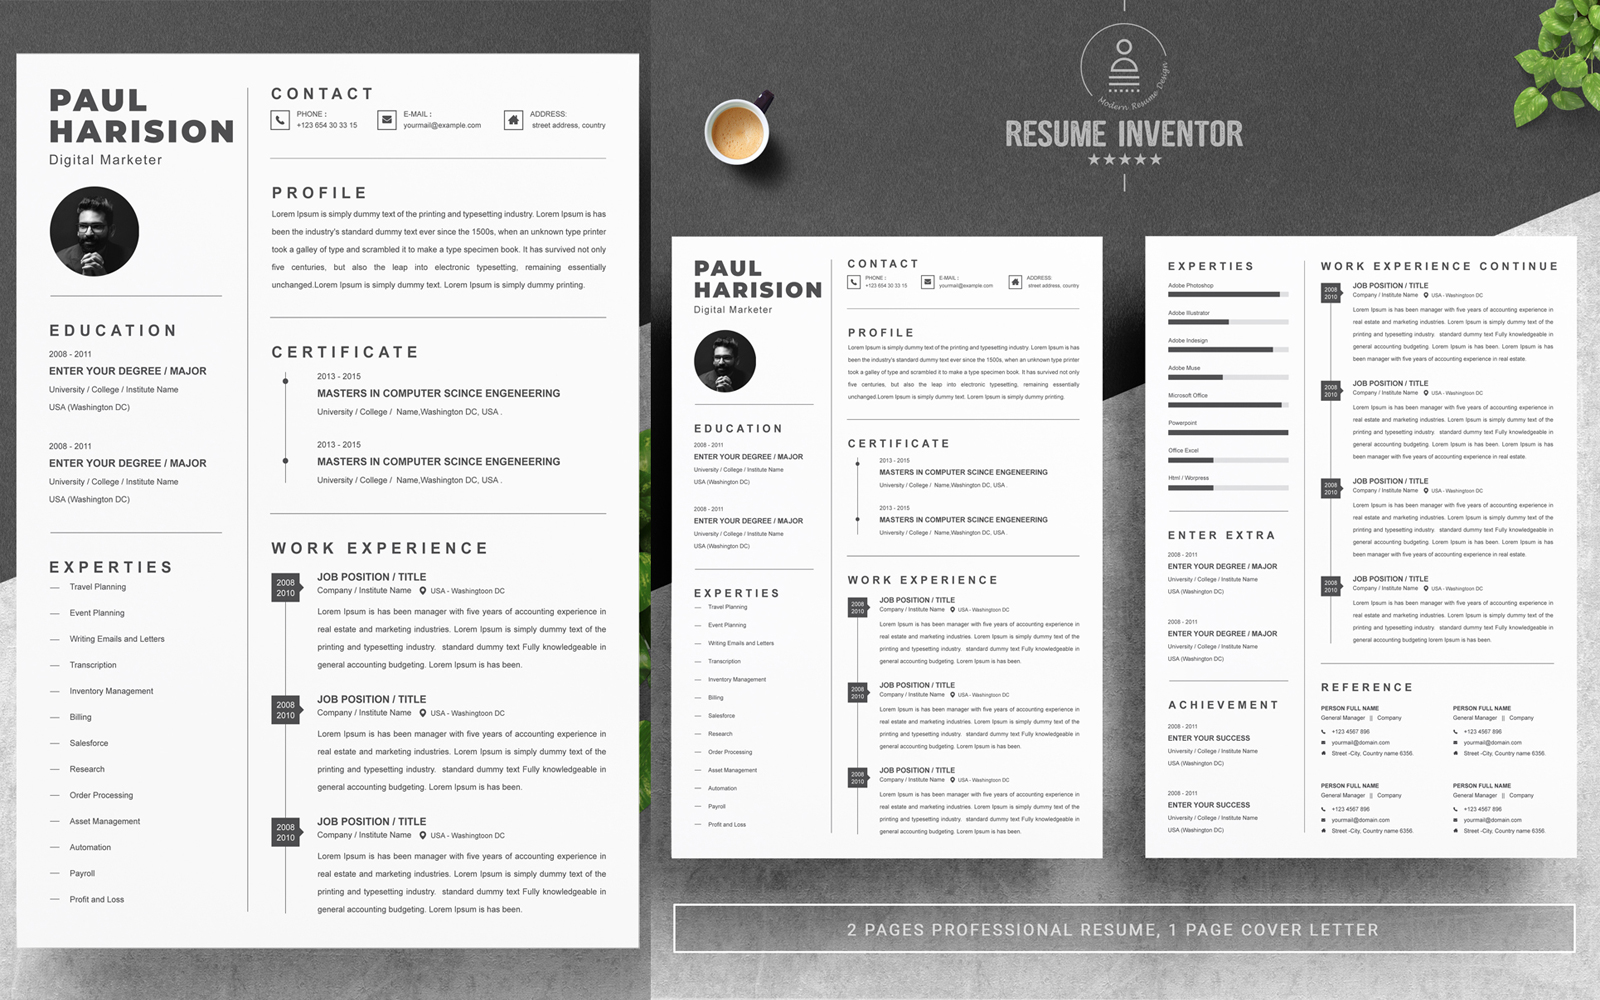 Harision / Clean Resume Template